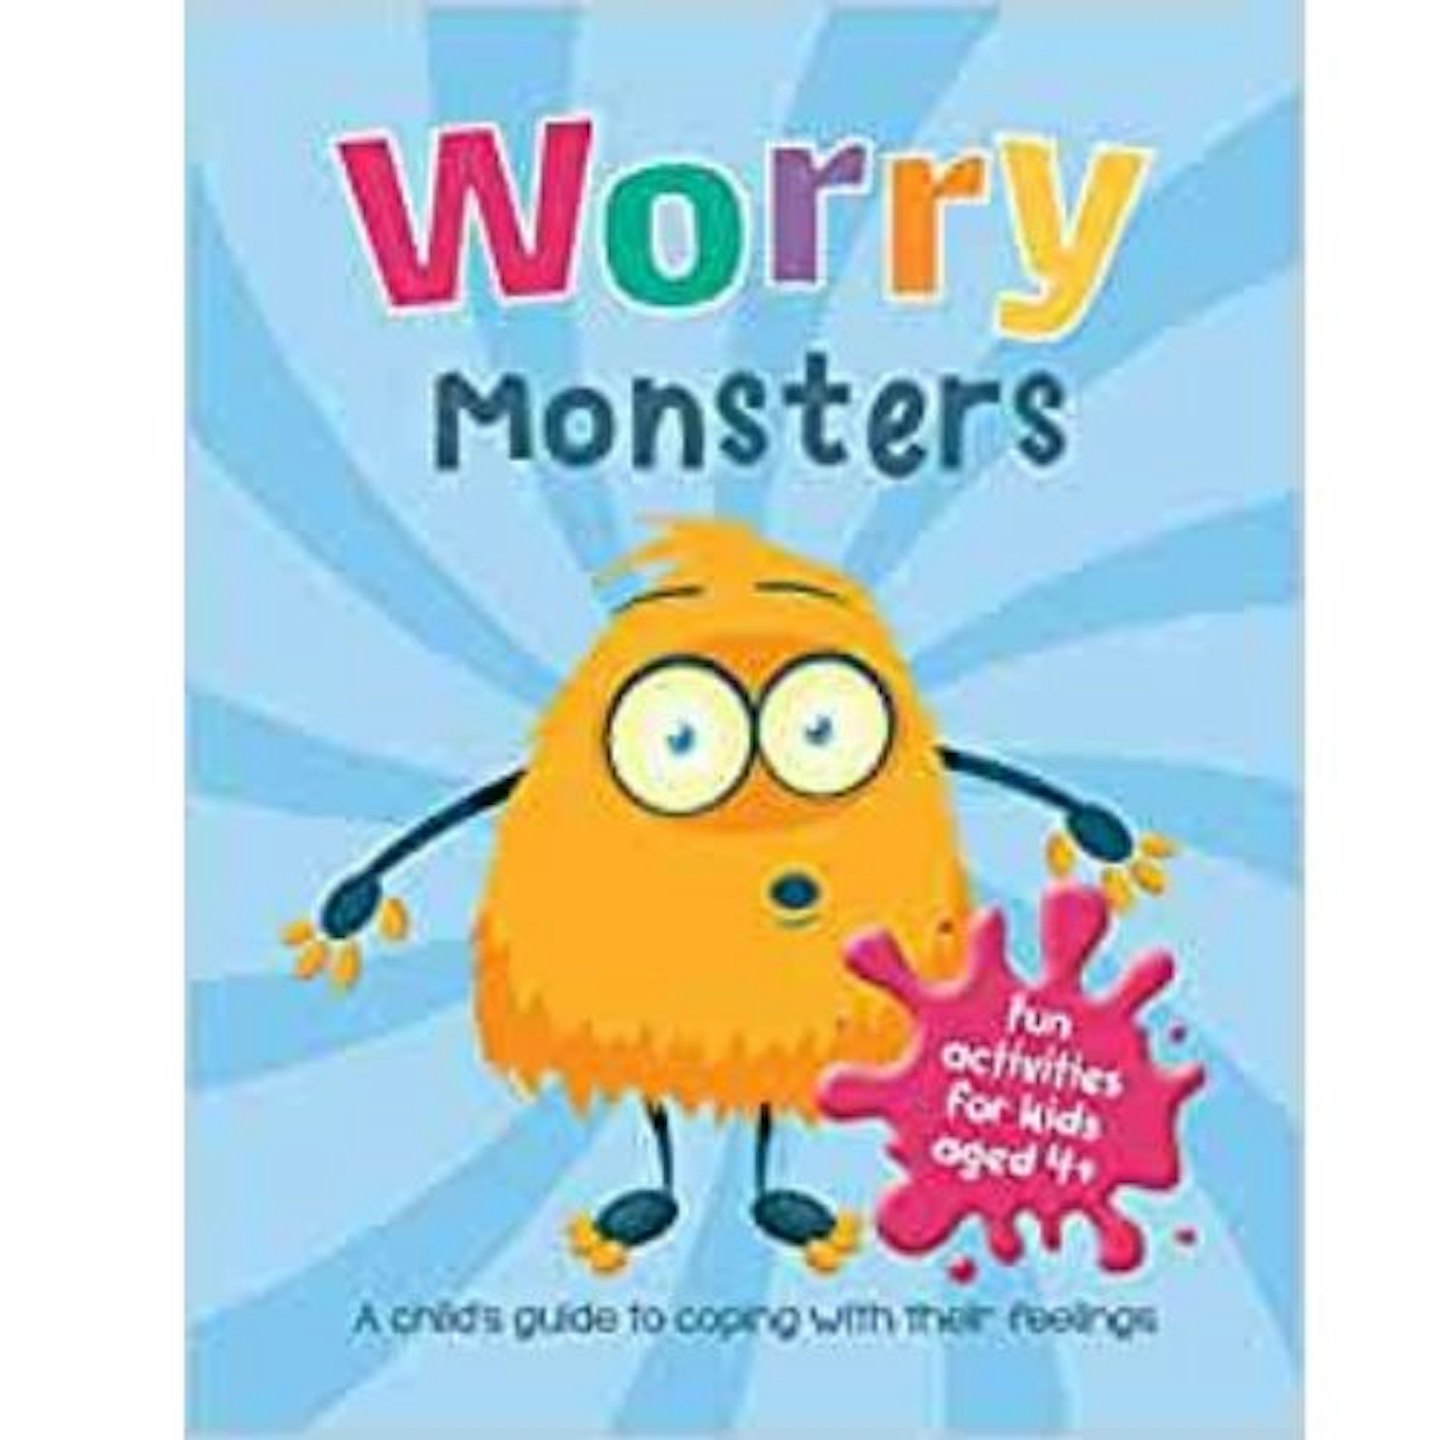 Worry Monsters: A Child's Guide to Coping With Their Feelings